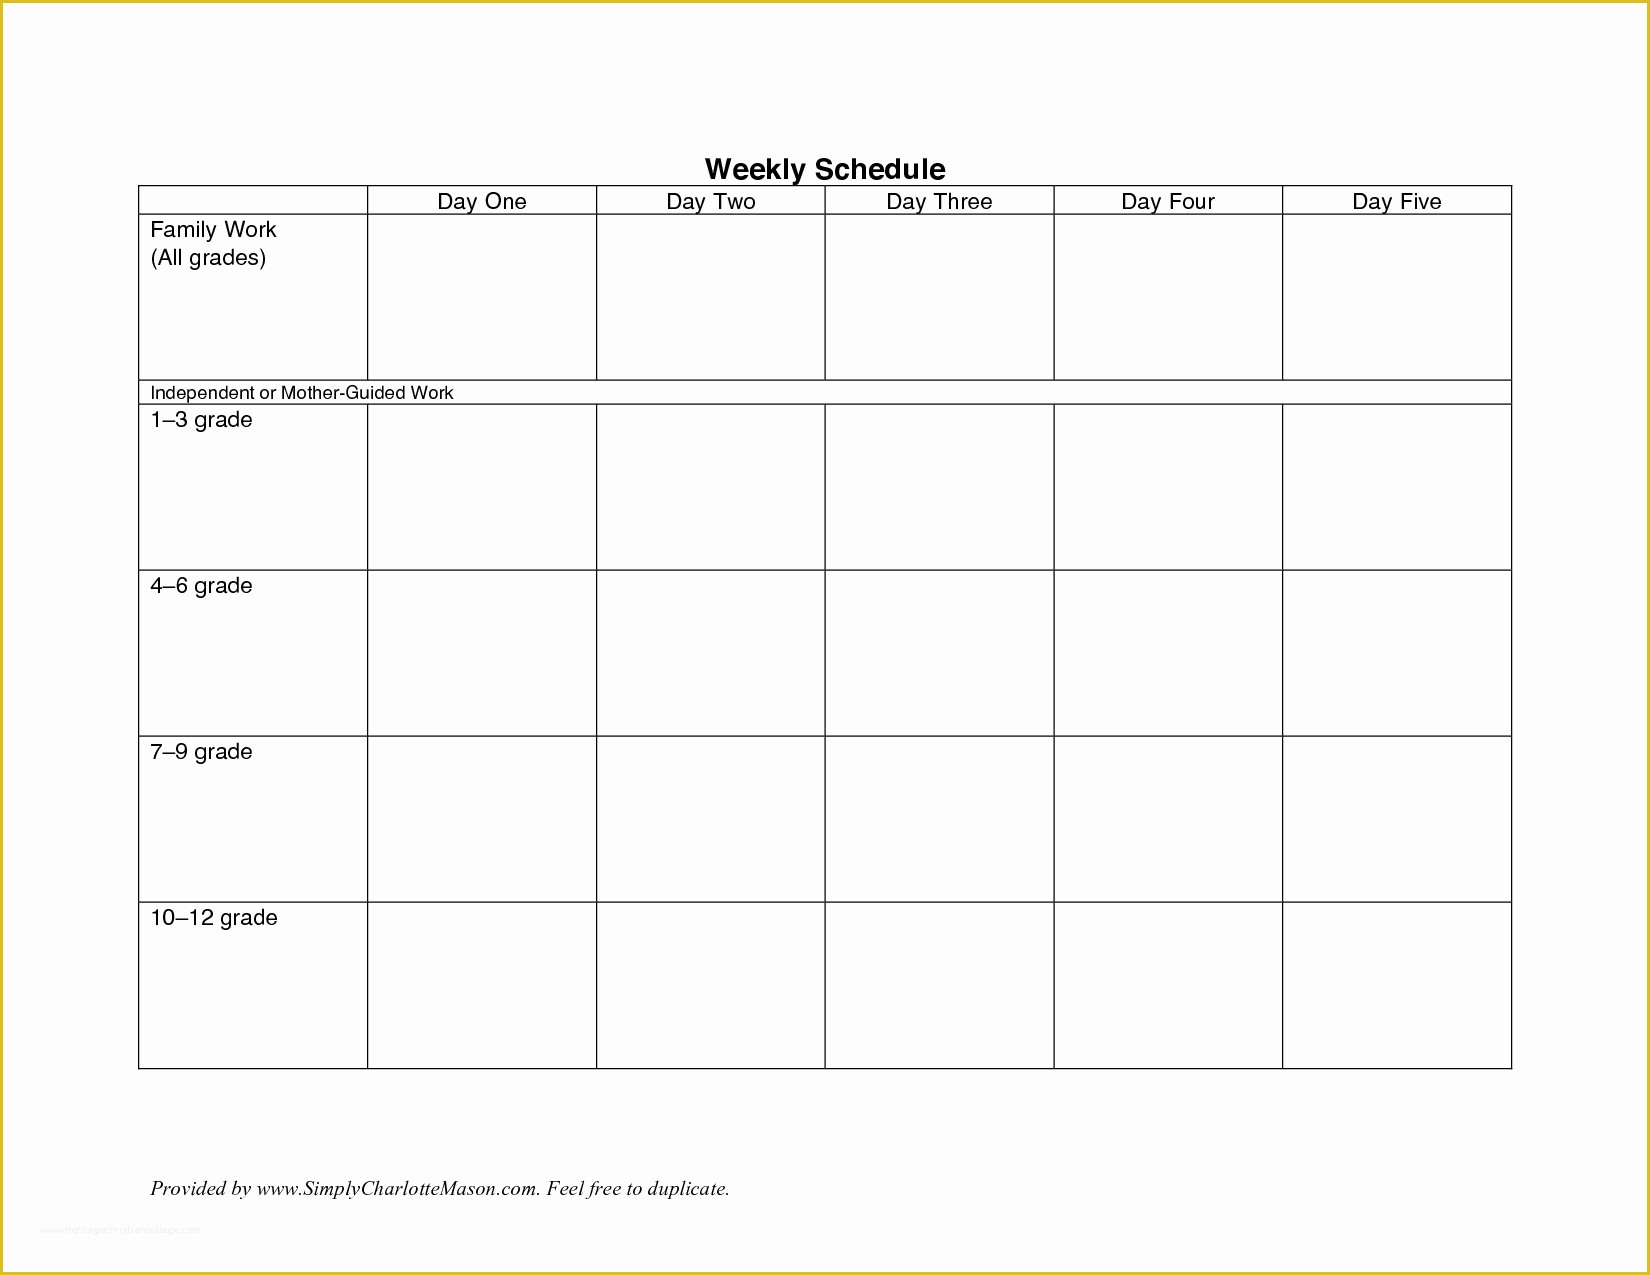 Free Online Work Schedule Template Of Search Results for “weekly Work Schedule Template